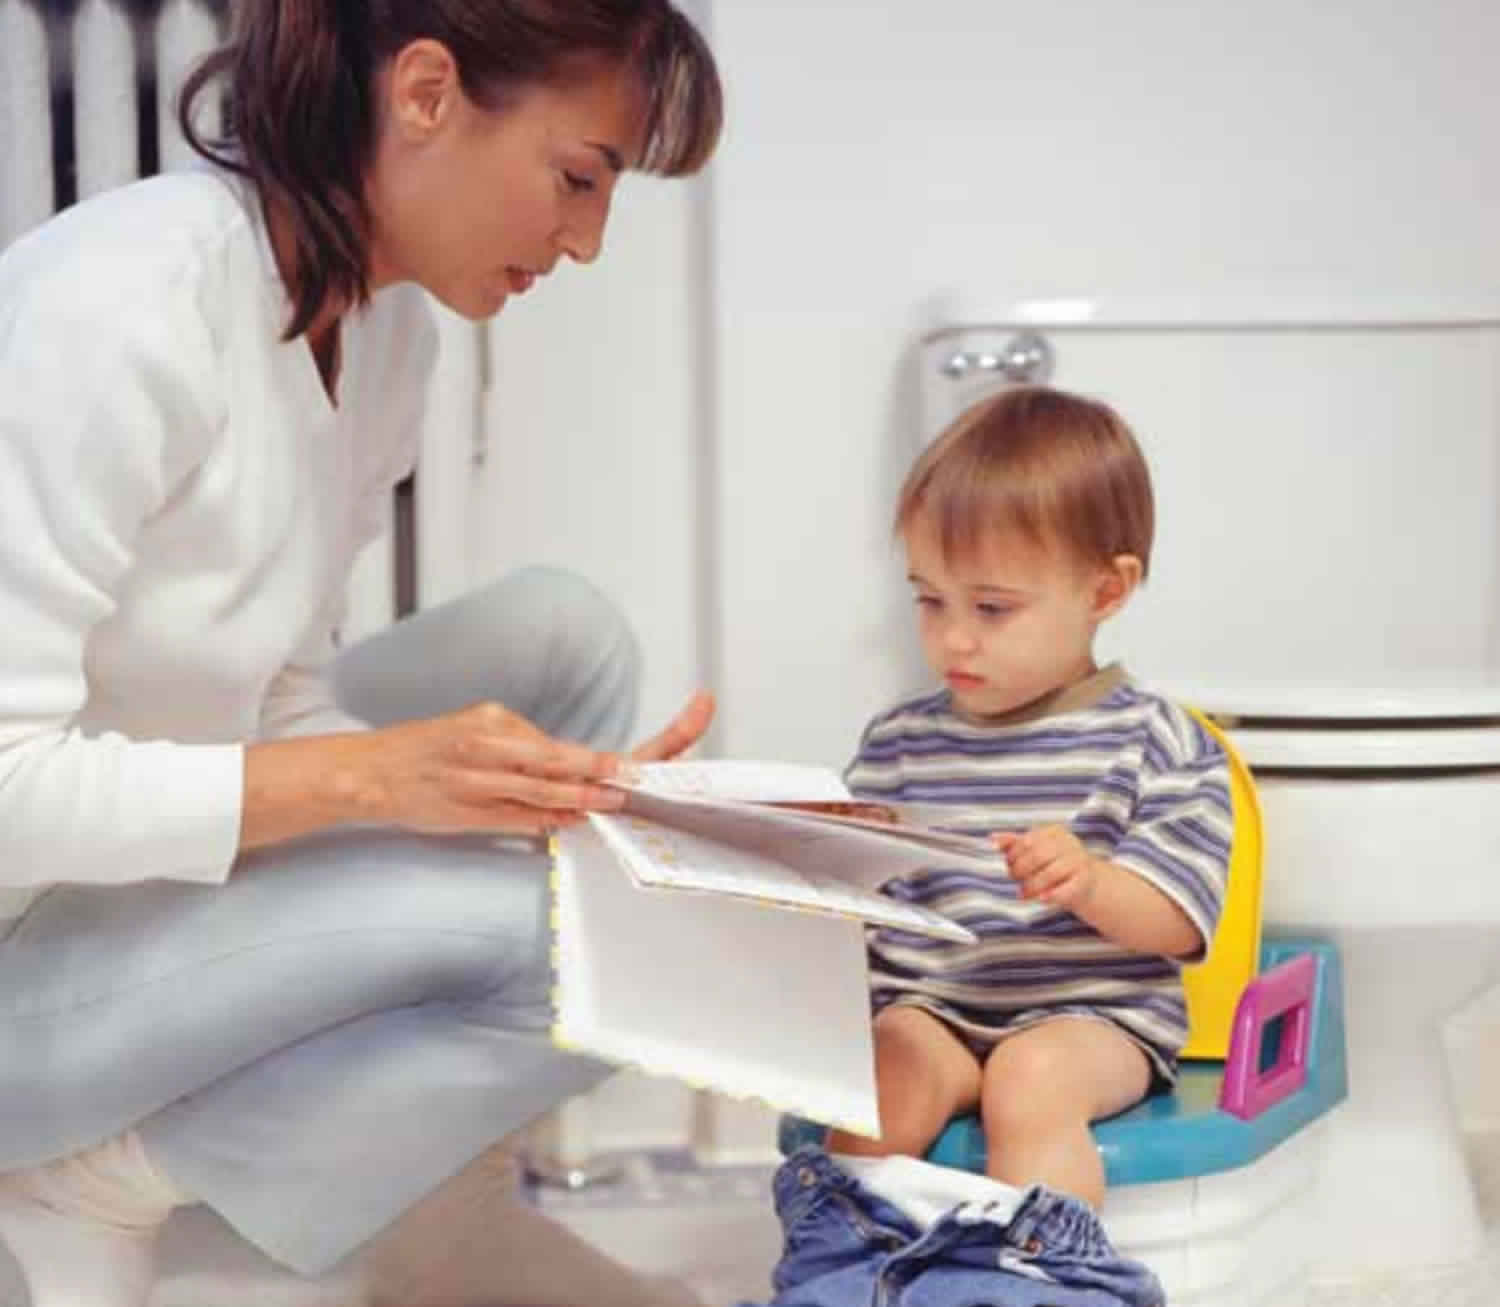 Toilet training and potty training tips for boys and girls